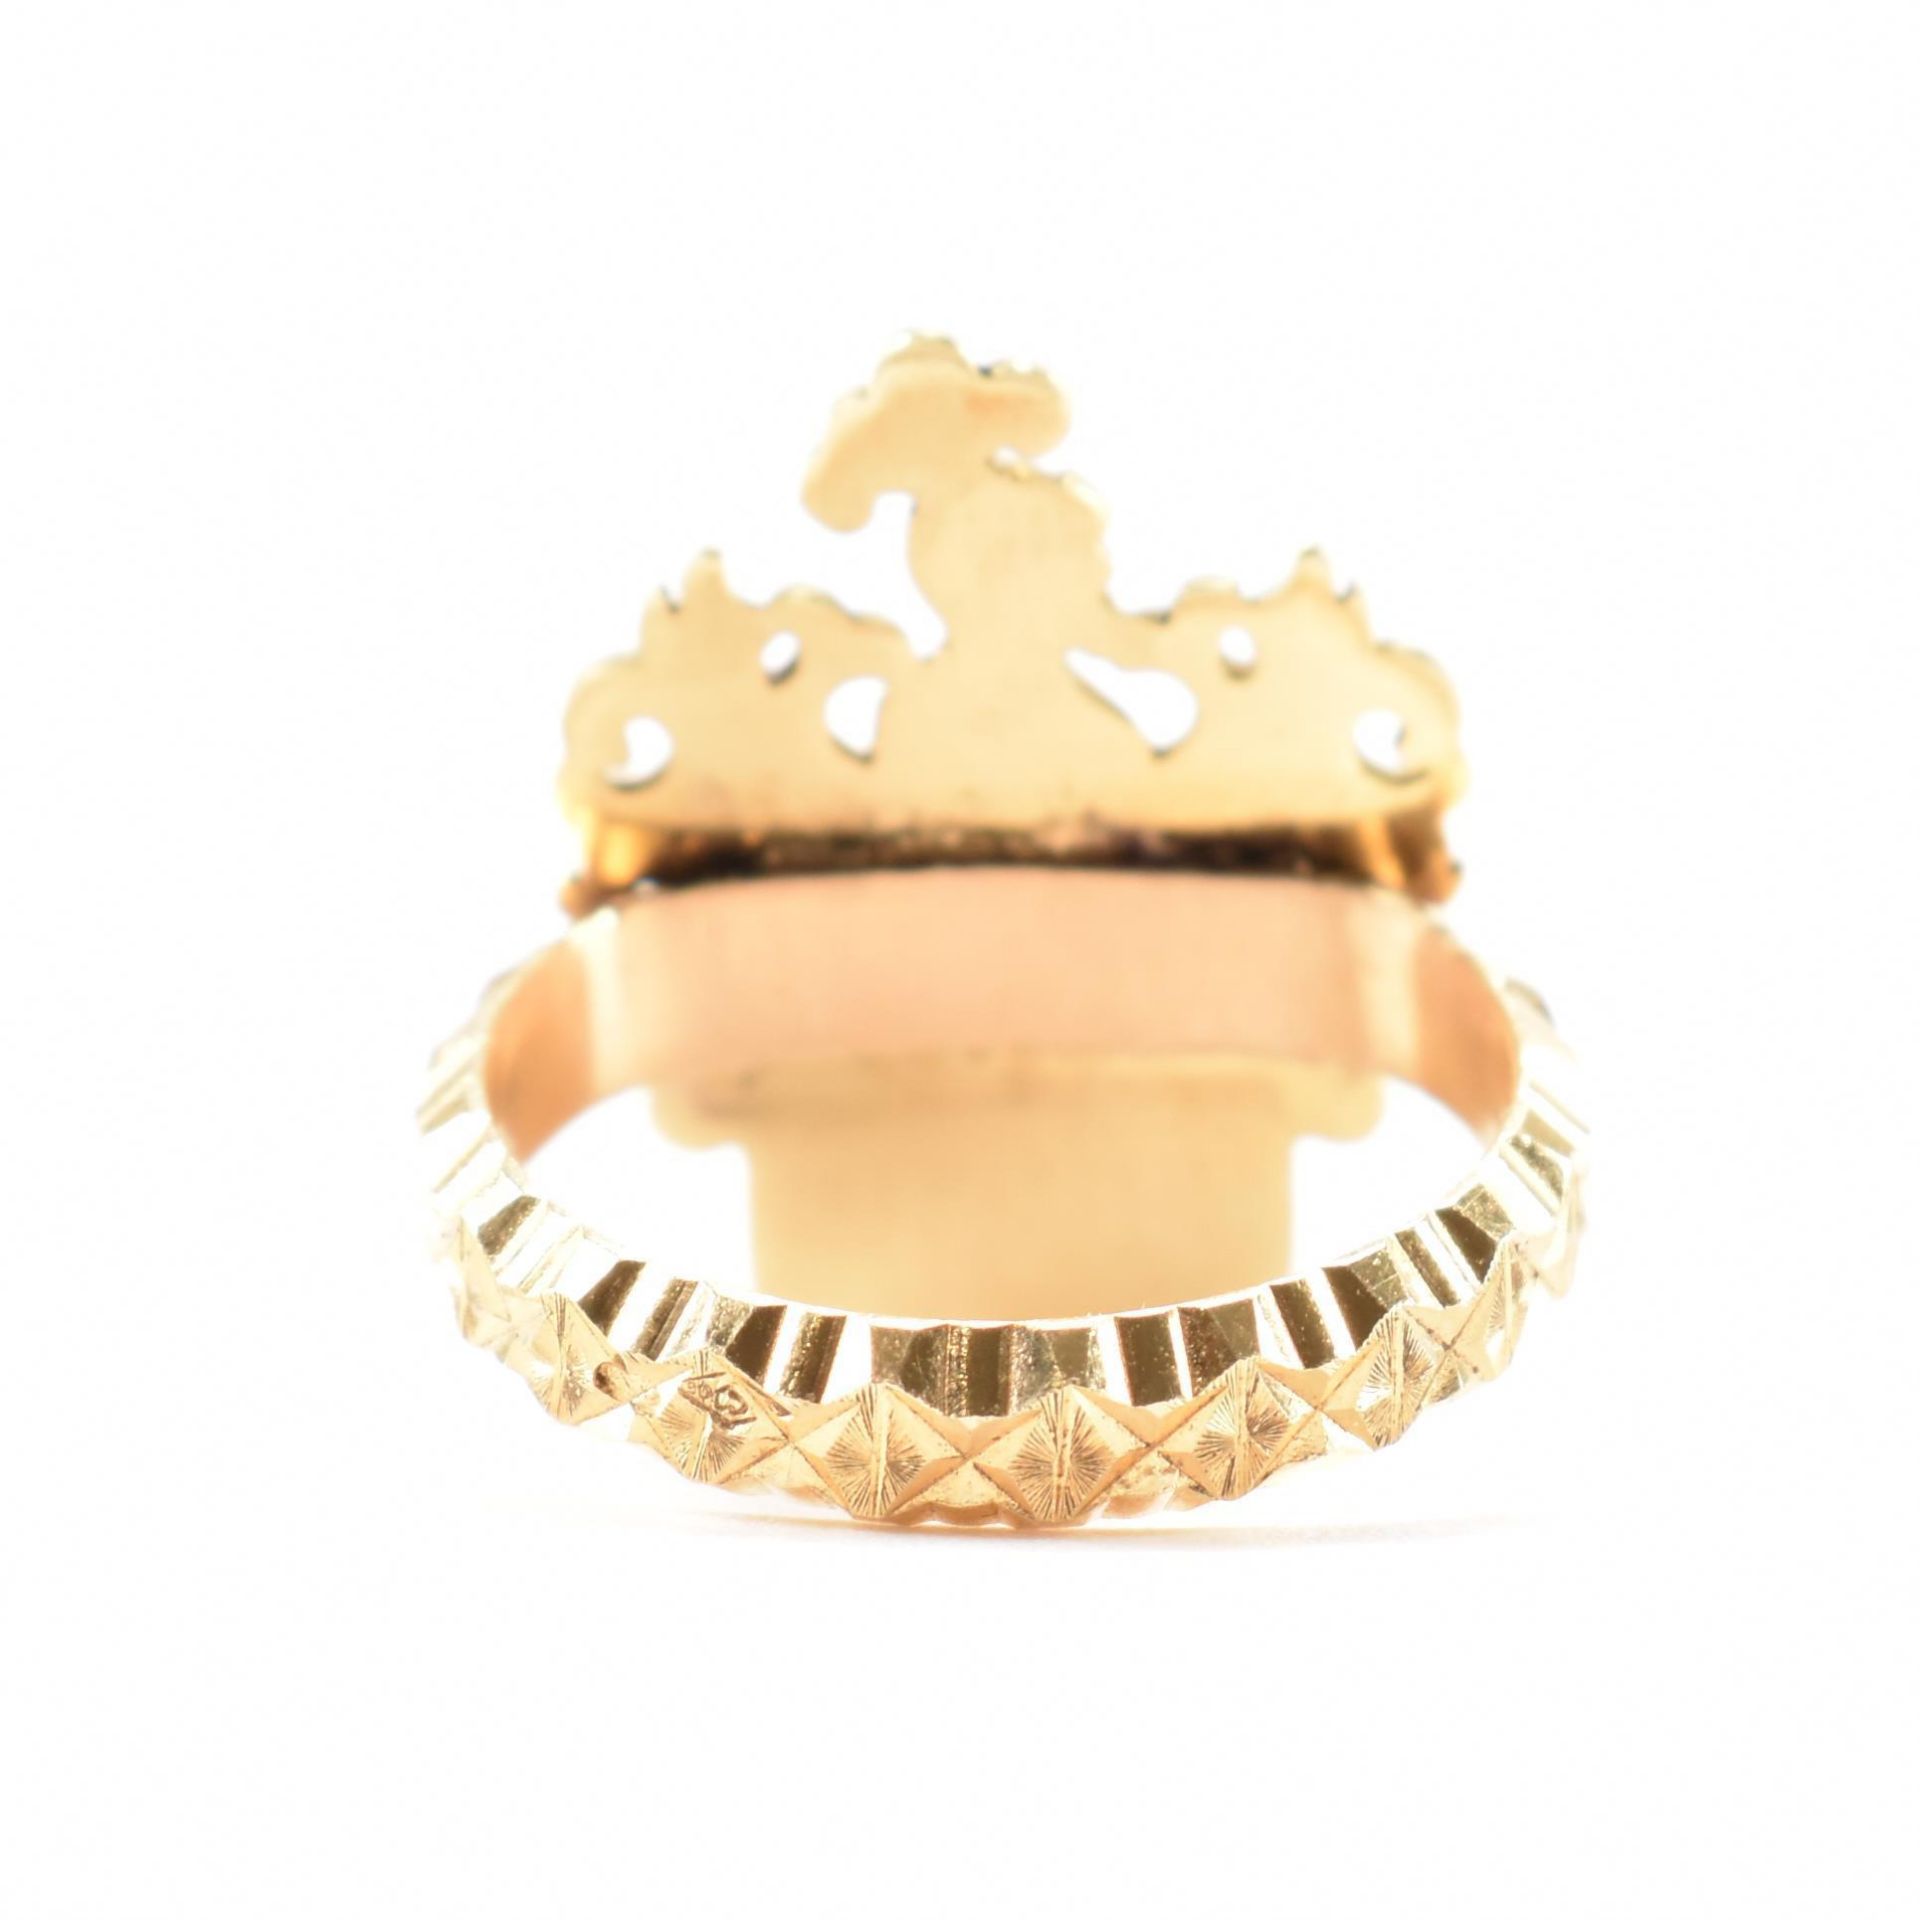 18CT GOLD FRENCH CHEVALIER SIGNET RING - Image 3 of 7